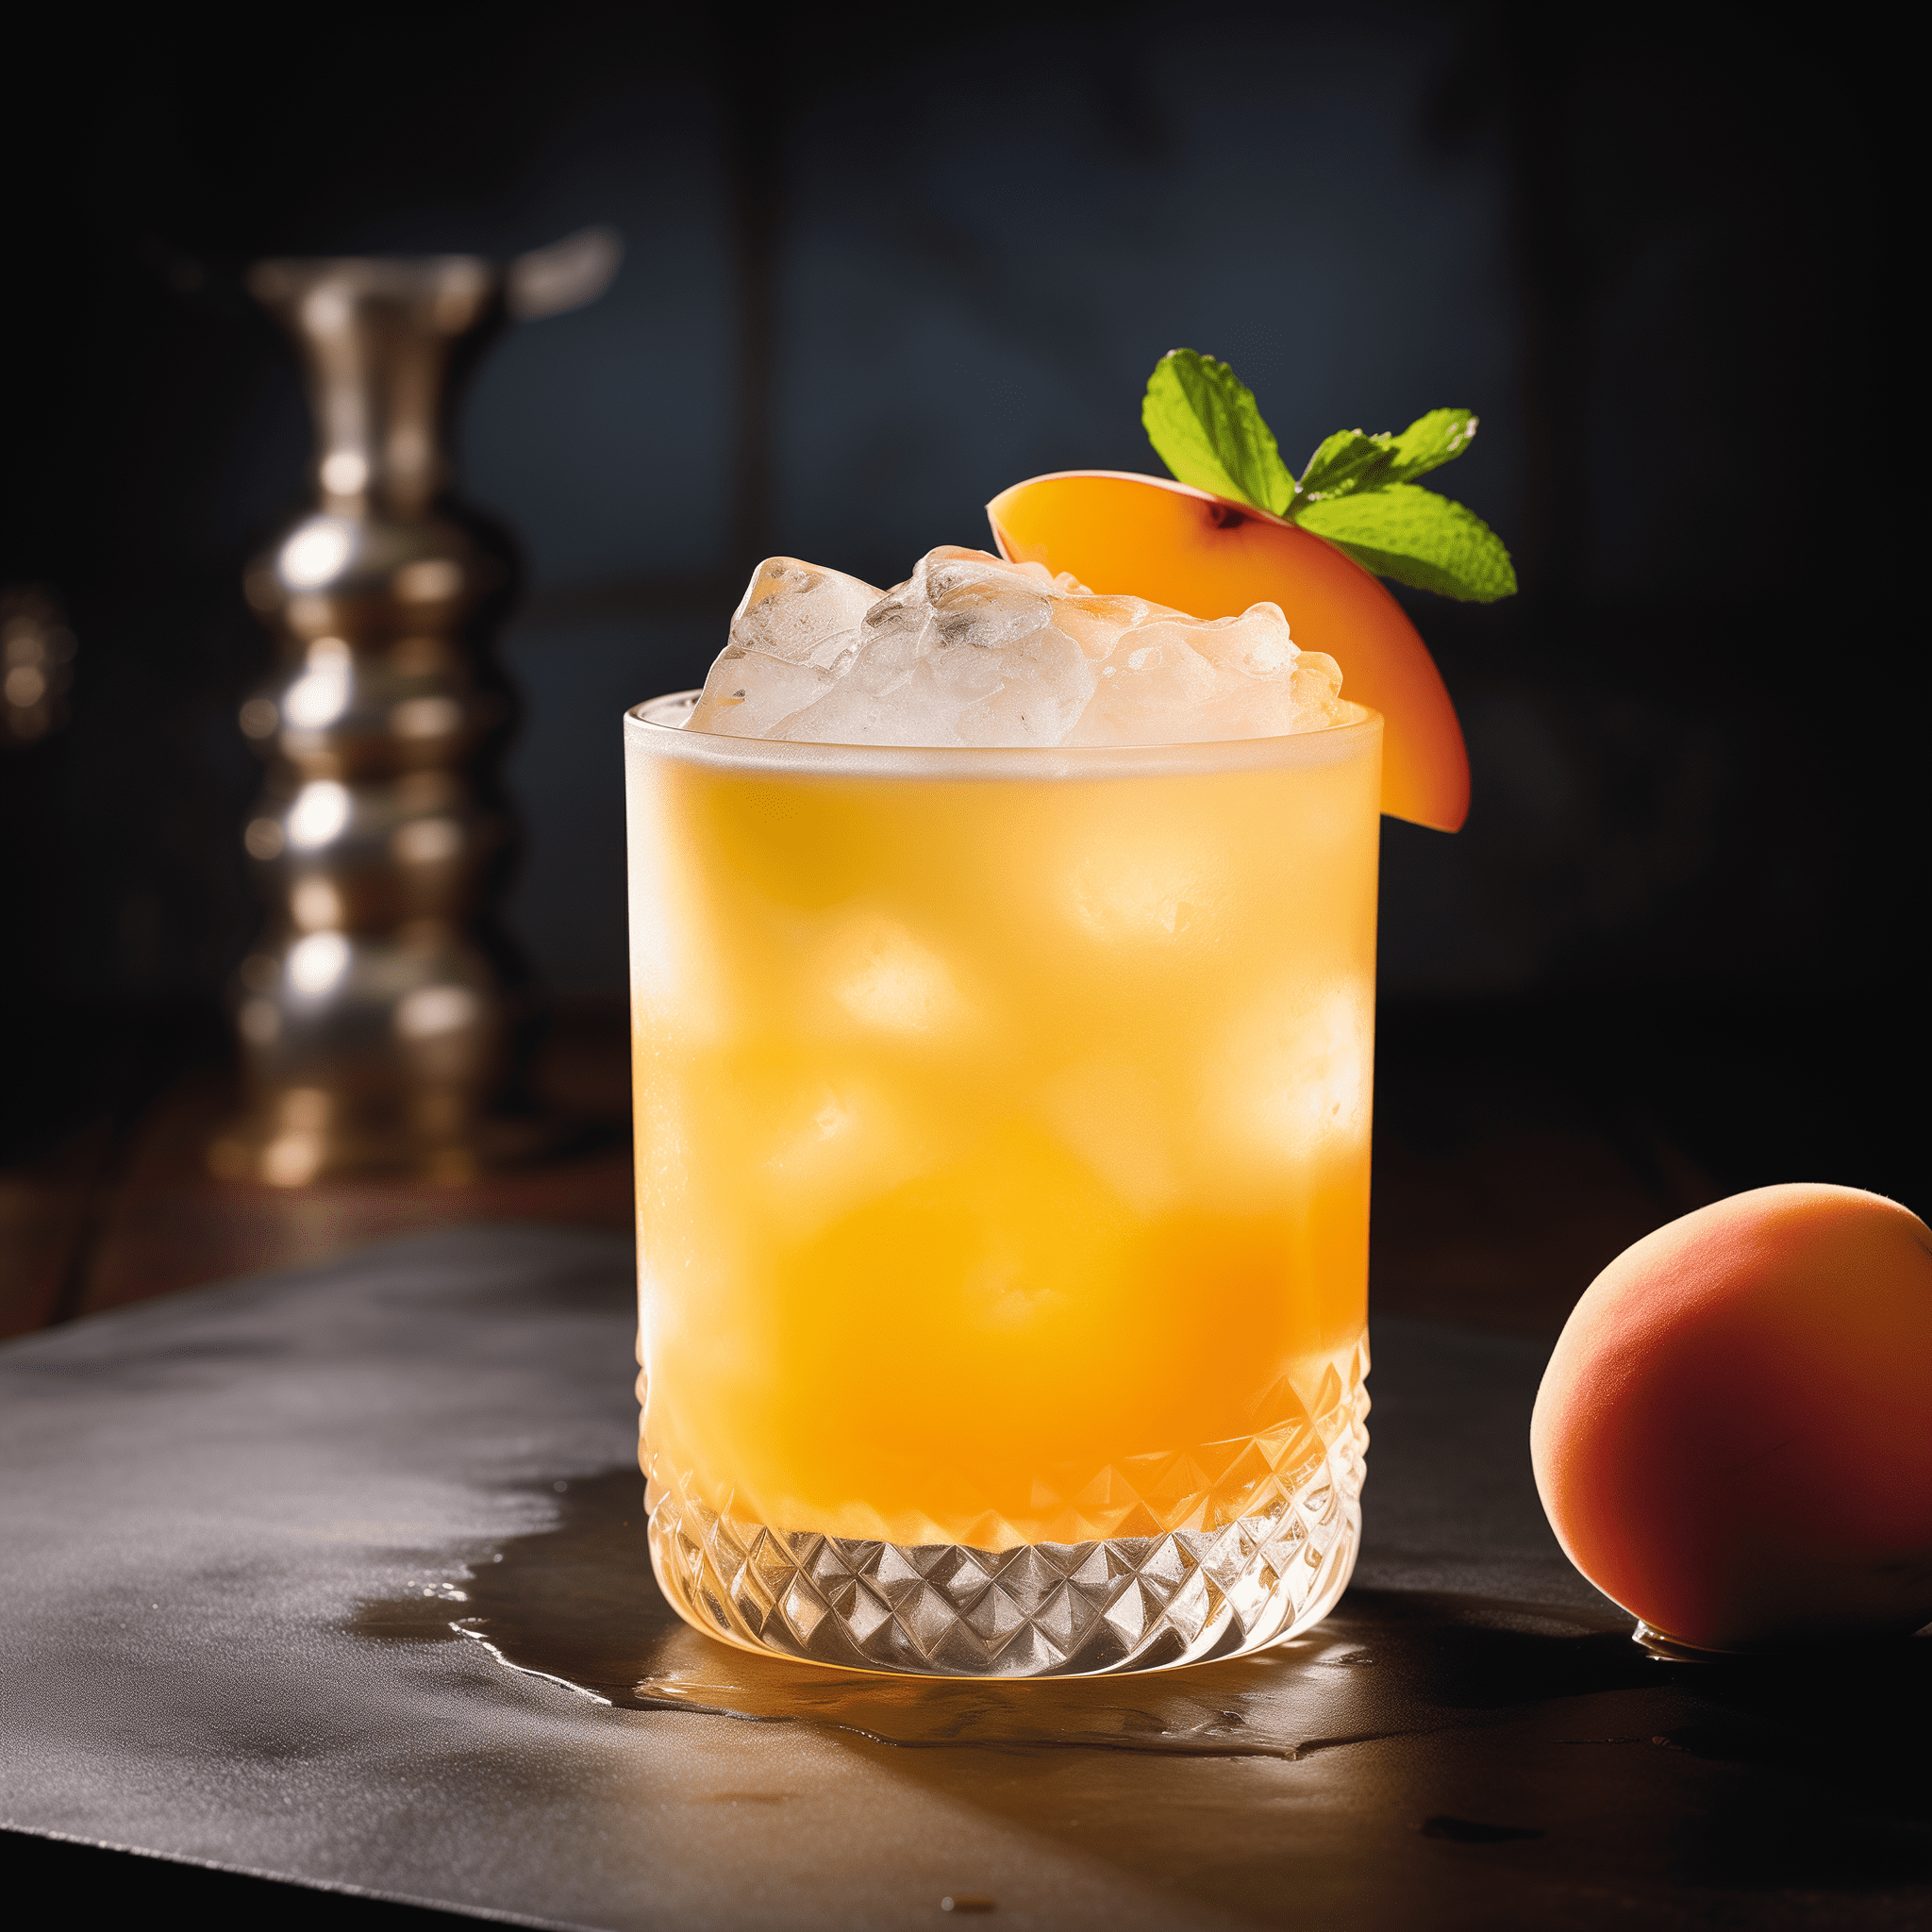 Peach Bomb Cocktail Recipe - The Peach Bomb cocktail is a sweet, fruity, and vibrant concoction. The peach schnapps provides a sugary peach flavor that is complemented by the vanilla and oak notes of the whiskey. The energy drink adds a tartness and a carbonated zing, making the drink refreshing and invigorating.